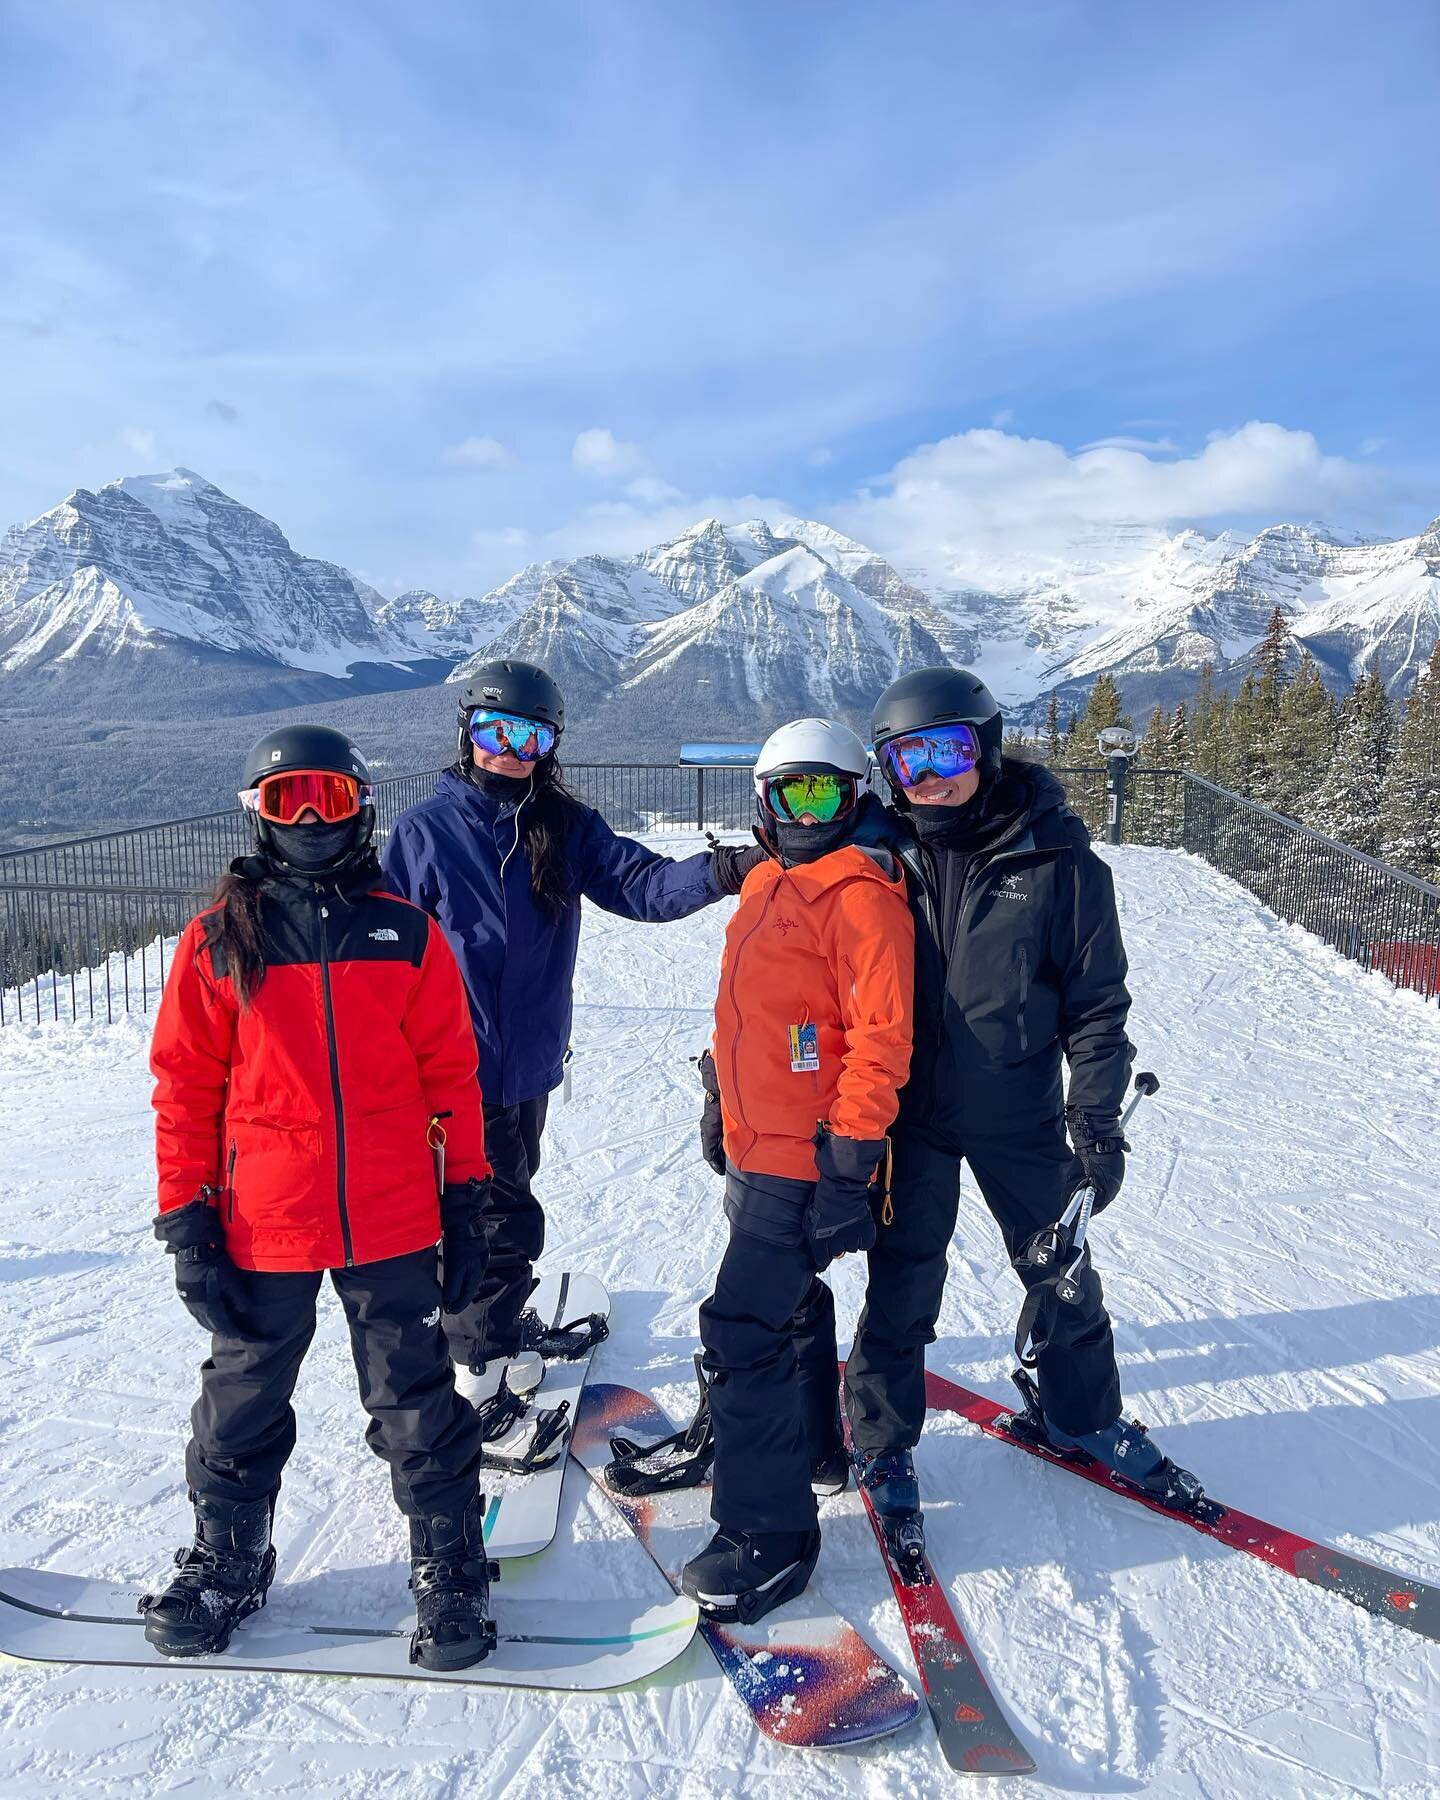 Having the best time @skilouise and @sunshinevillage. 15 cm of fresh fluffy powder on Wednesday, it was an absolutely unreal day. A couple more days here then home to Toronto this weekend. 

True story: When  I was at University in New Zealand most o